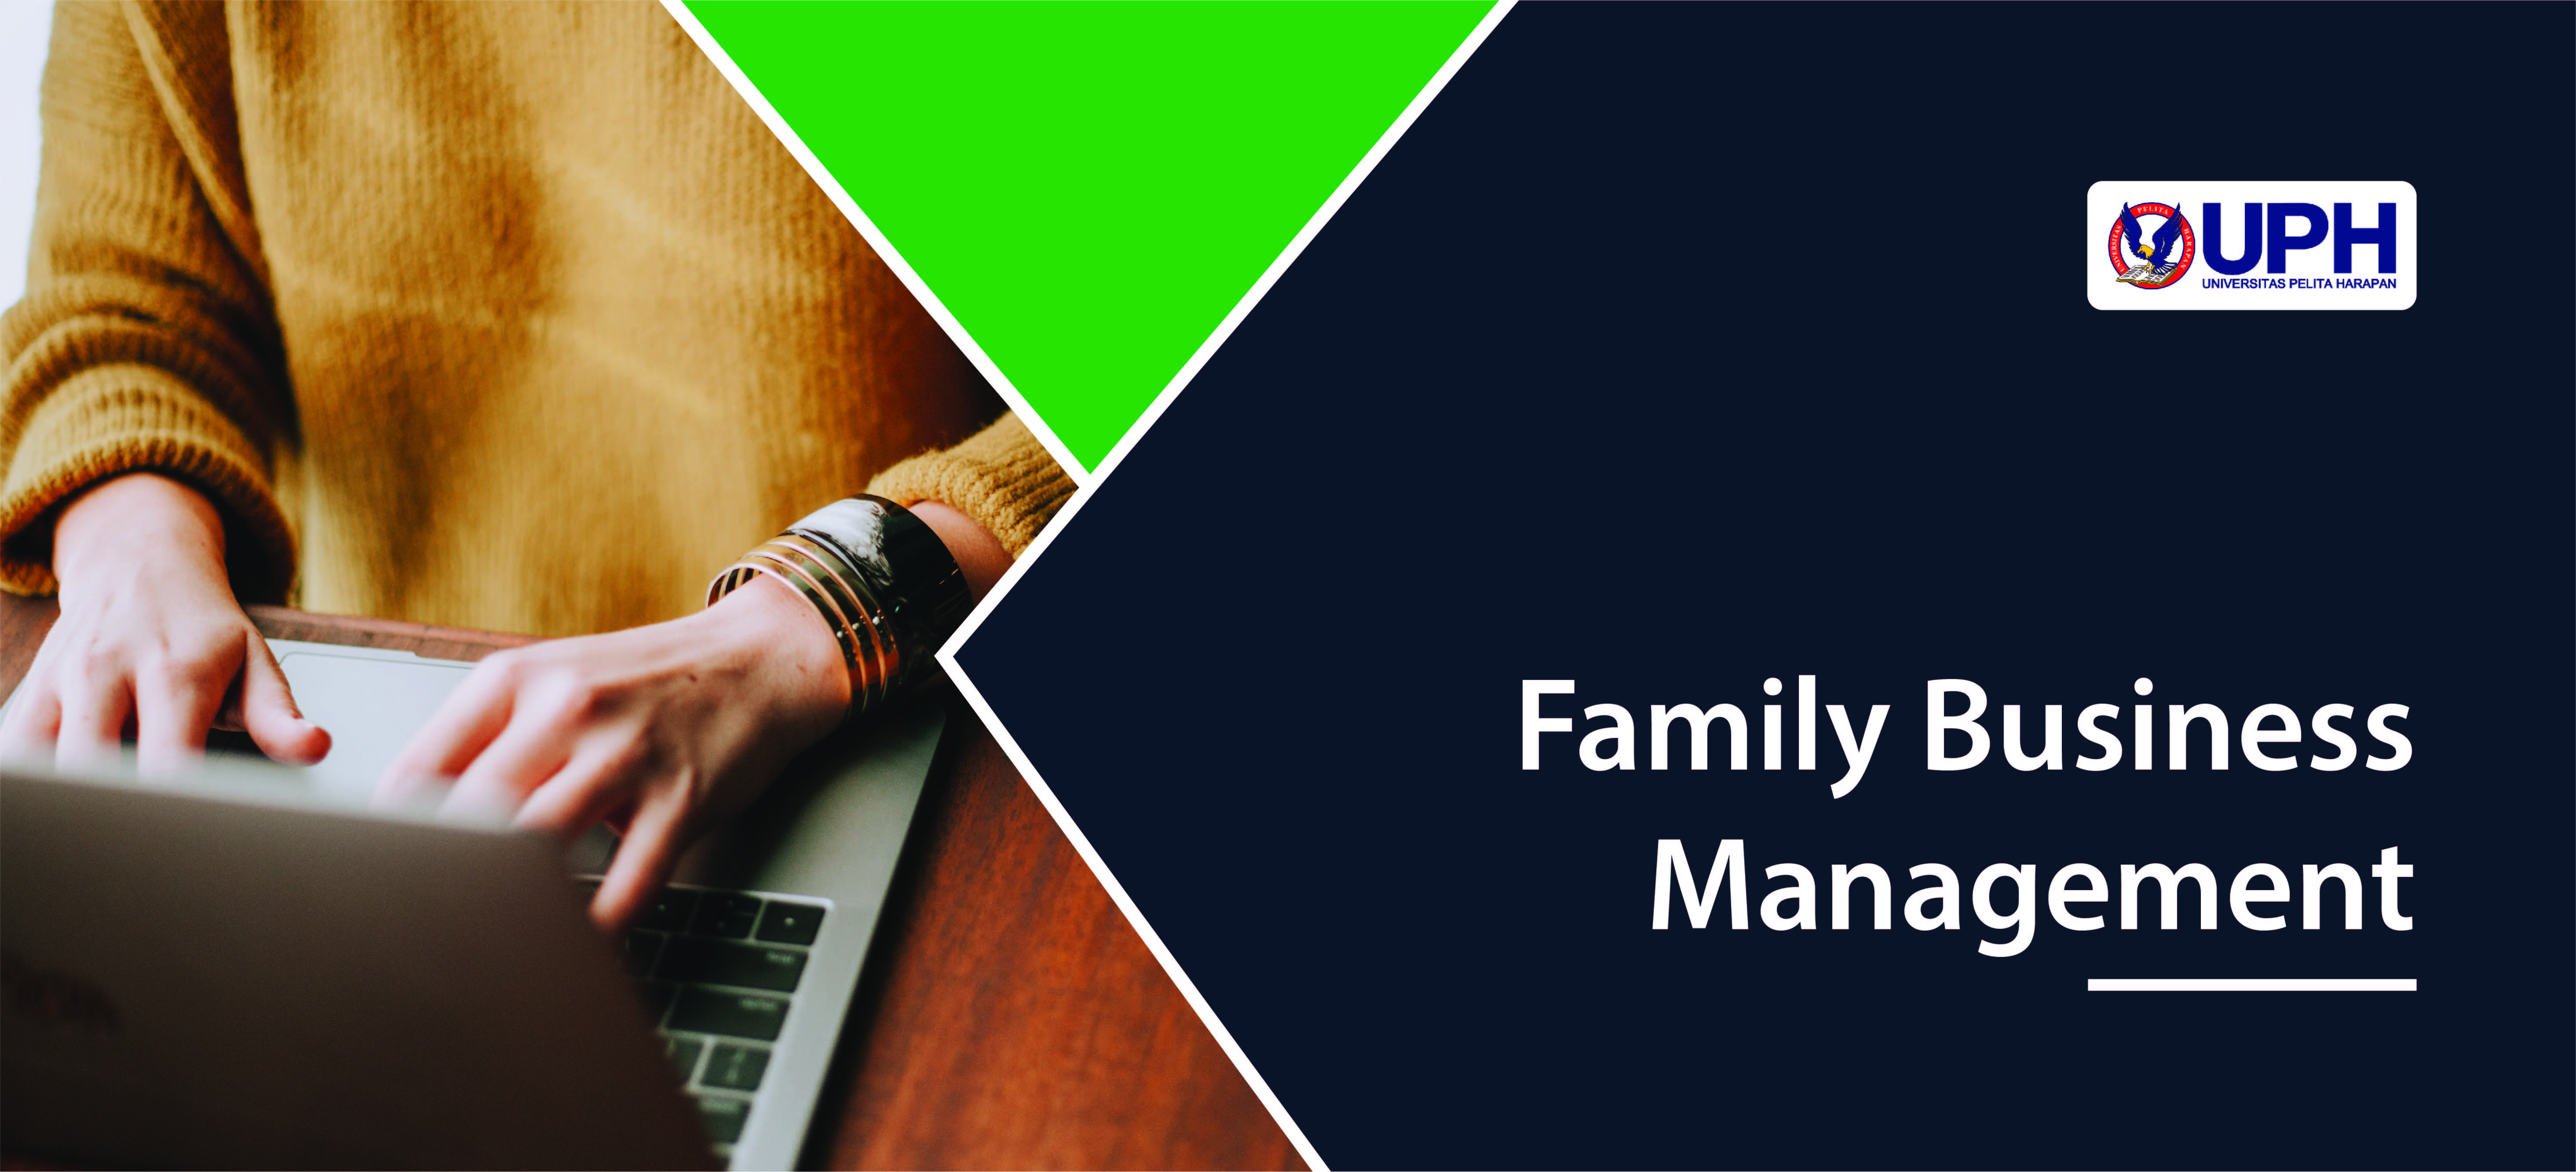 Family Business Management - MGT96860- A